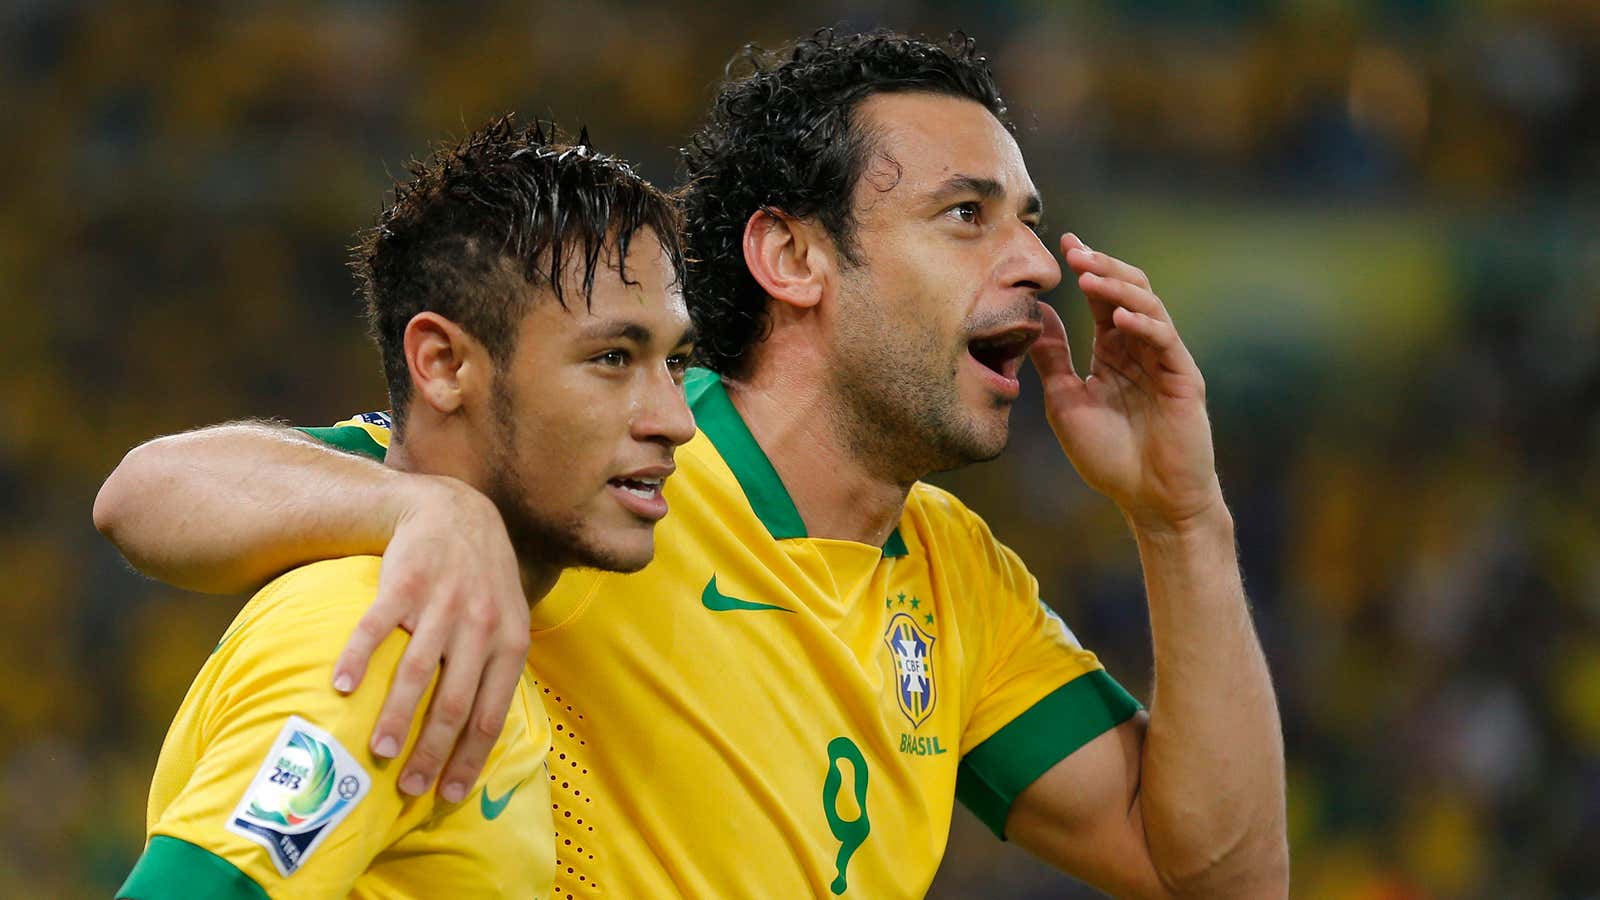 Fred and Neymar were sweating last year’s global soccer tournament—and it didn’t even break 90°F in Rio de Janeiro.